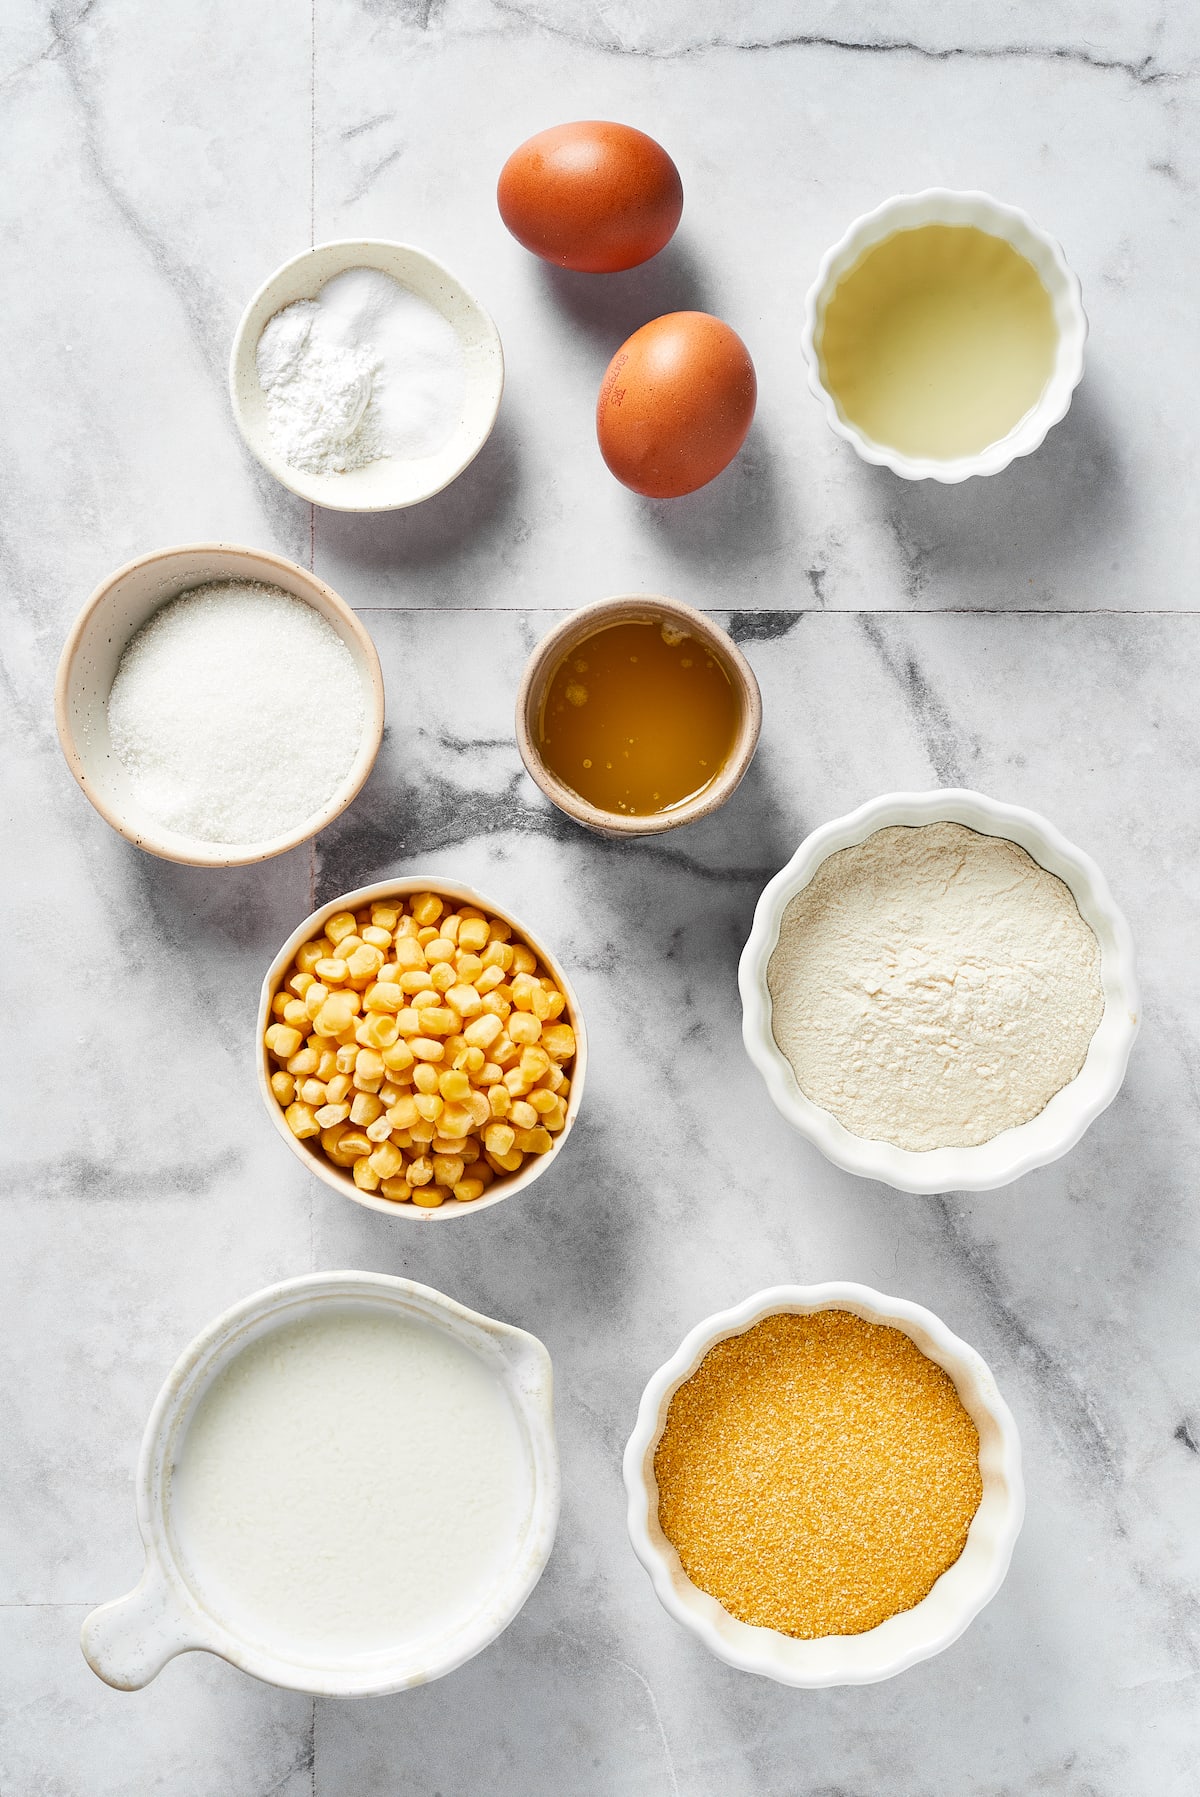 Overhead view of the ingredients needed for cornbread: a bowl of cornmeal, a bowl of flour, a bowl of buttermilk, a bowl of corn, a bowl of melted butter, a bowl of oil, a bowl of sugar, a bowl of salt, baking soda, and baking powder, and eggs